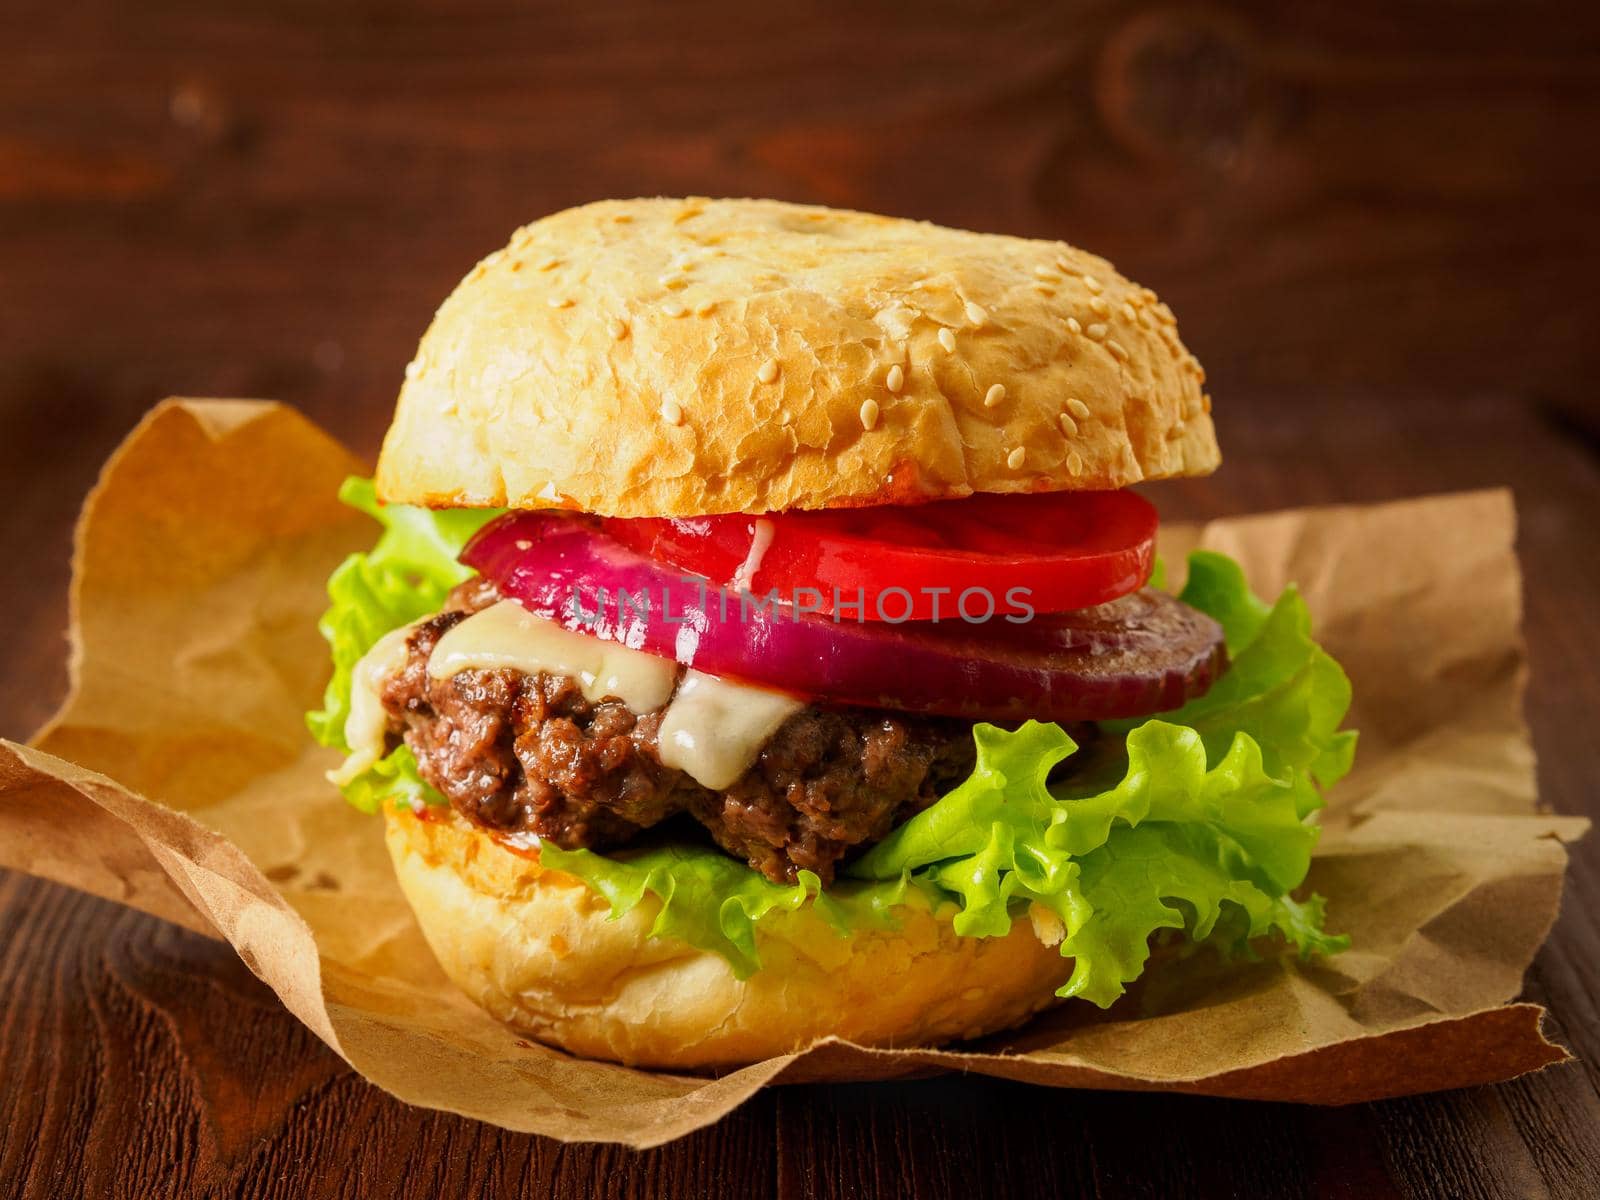 Big delicious homemade burger with beef cutlet, cheese, onion, tomato and lettuce on toasted rolls. American fast food, unhealthy eating. Side view, selective focus